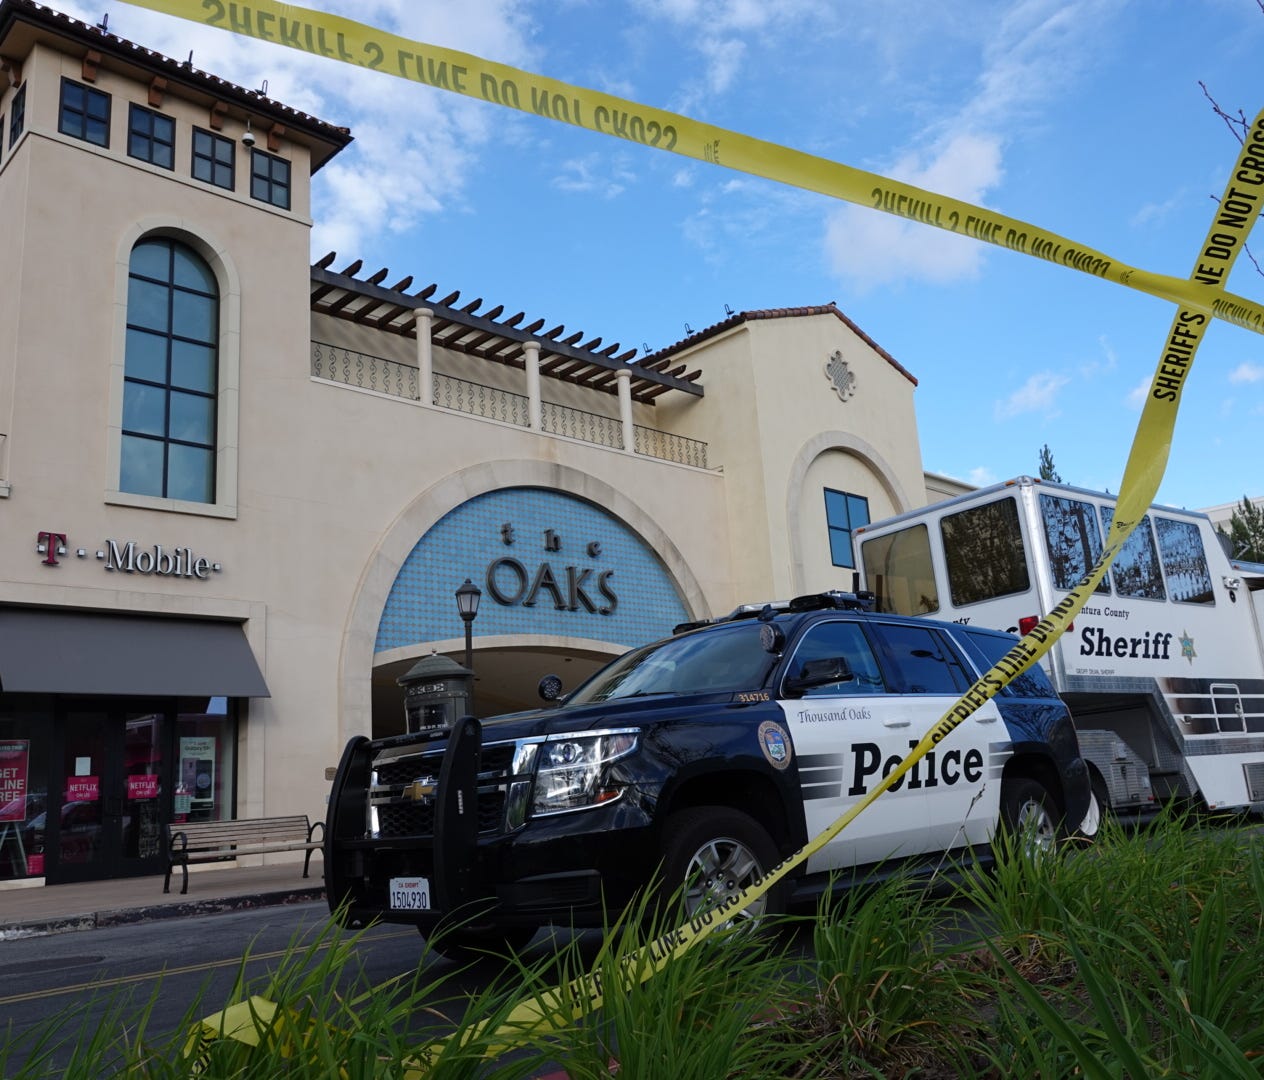 This was the scene Saturday afternoon at The Oaks after the fatal shooting.